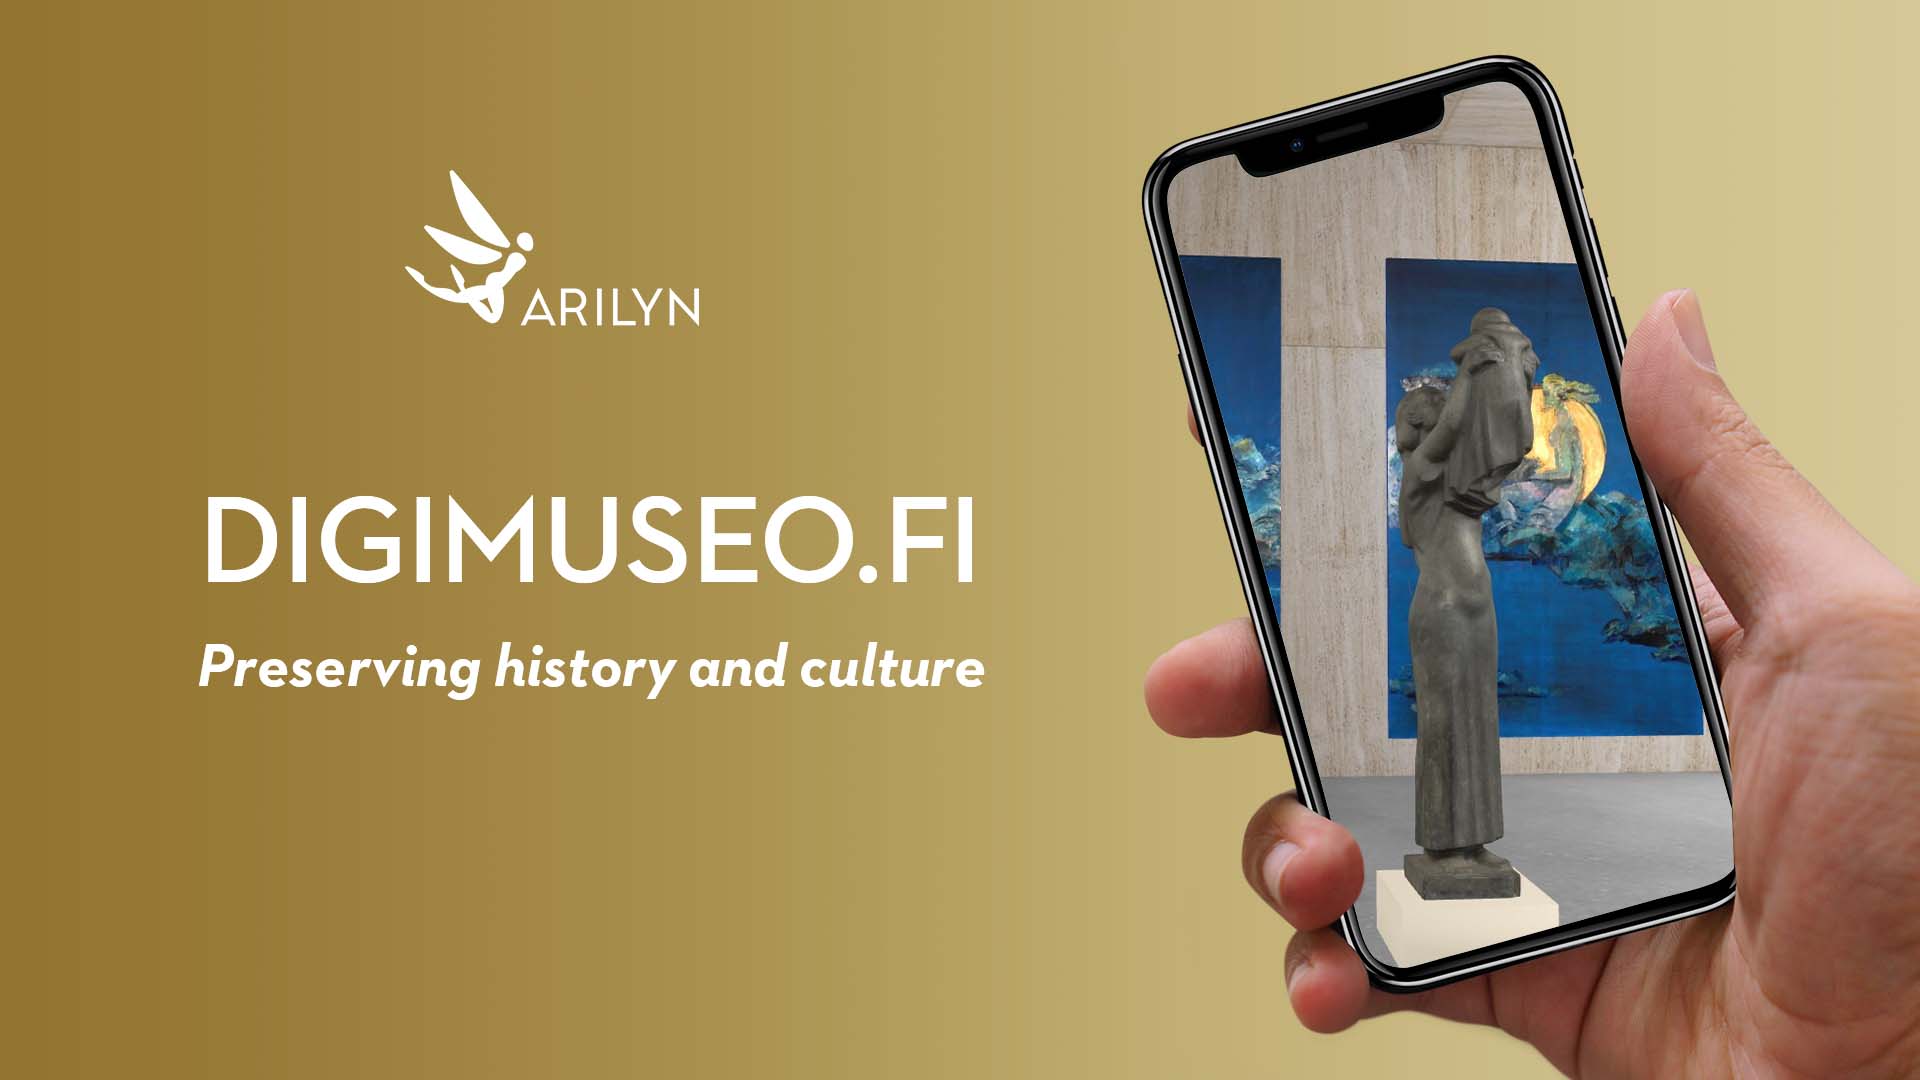 Digital museum is improving preservation and accessibility with AR